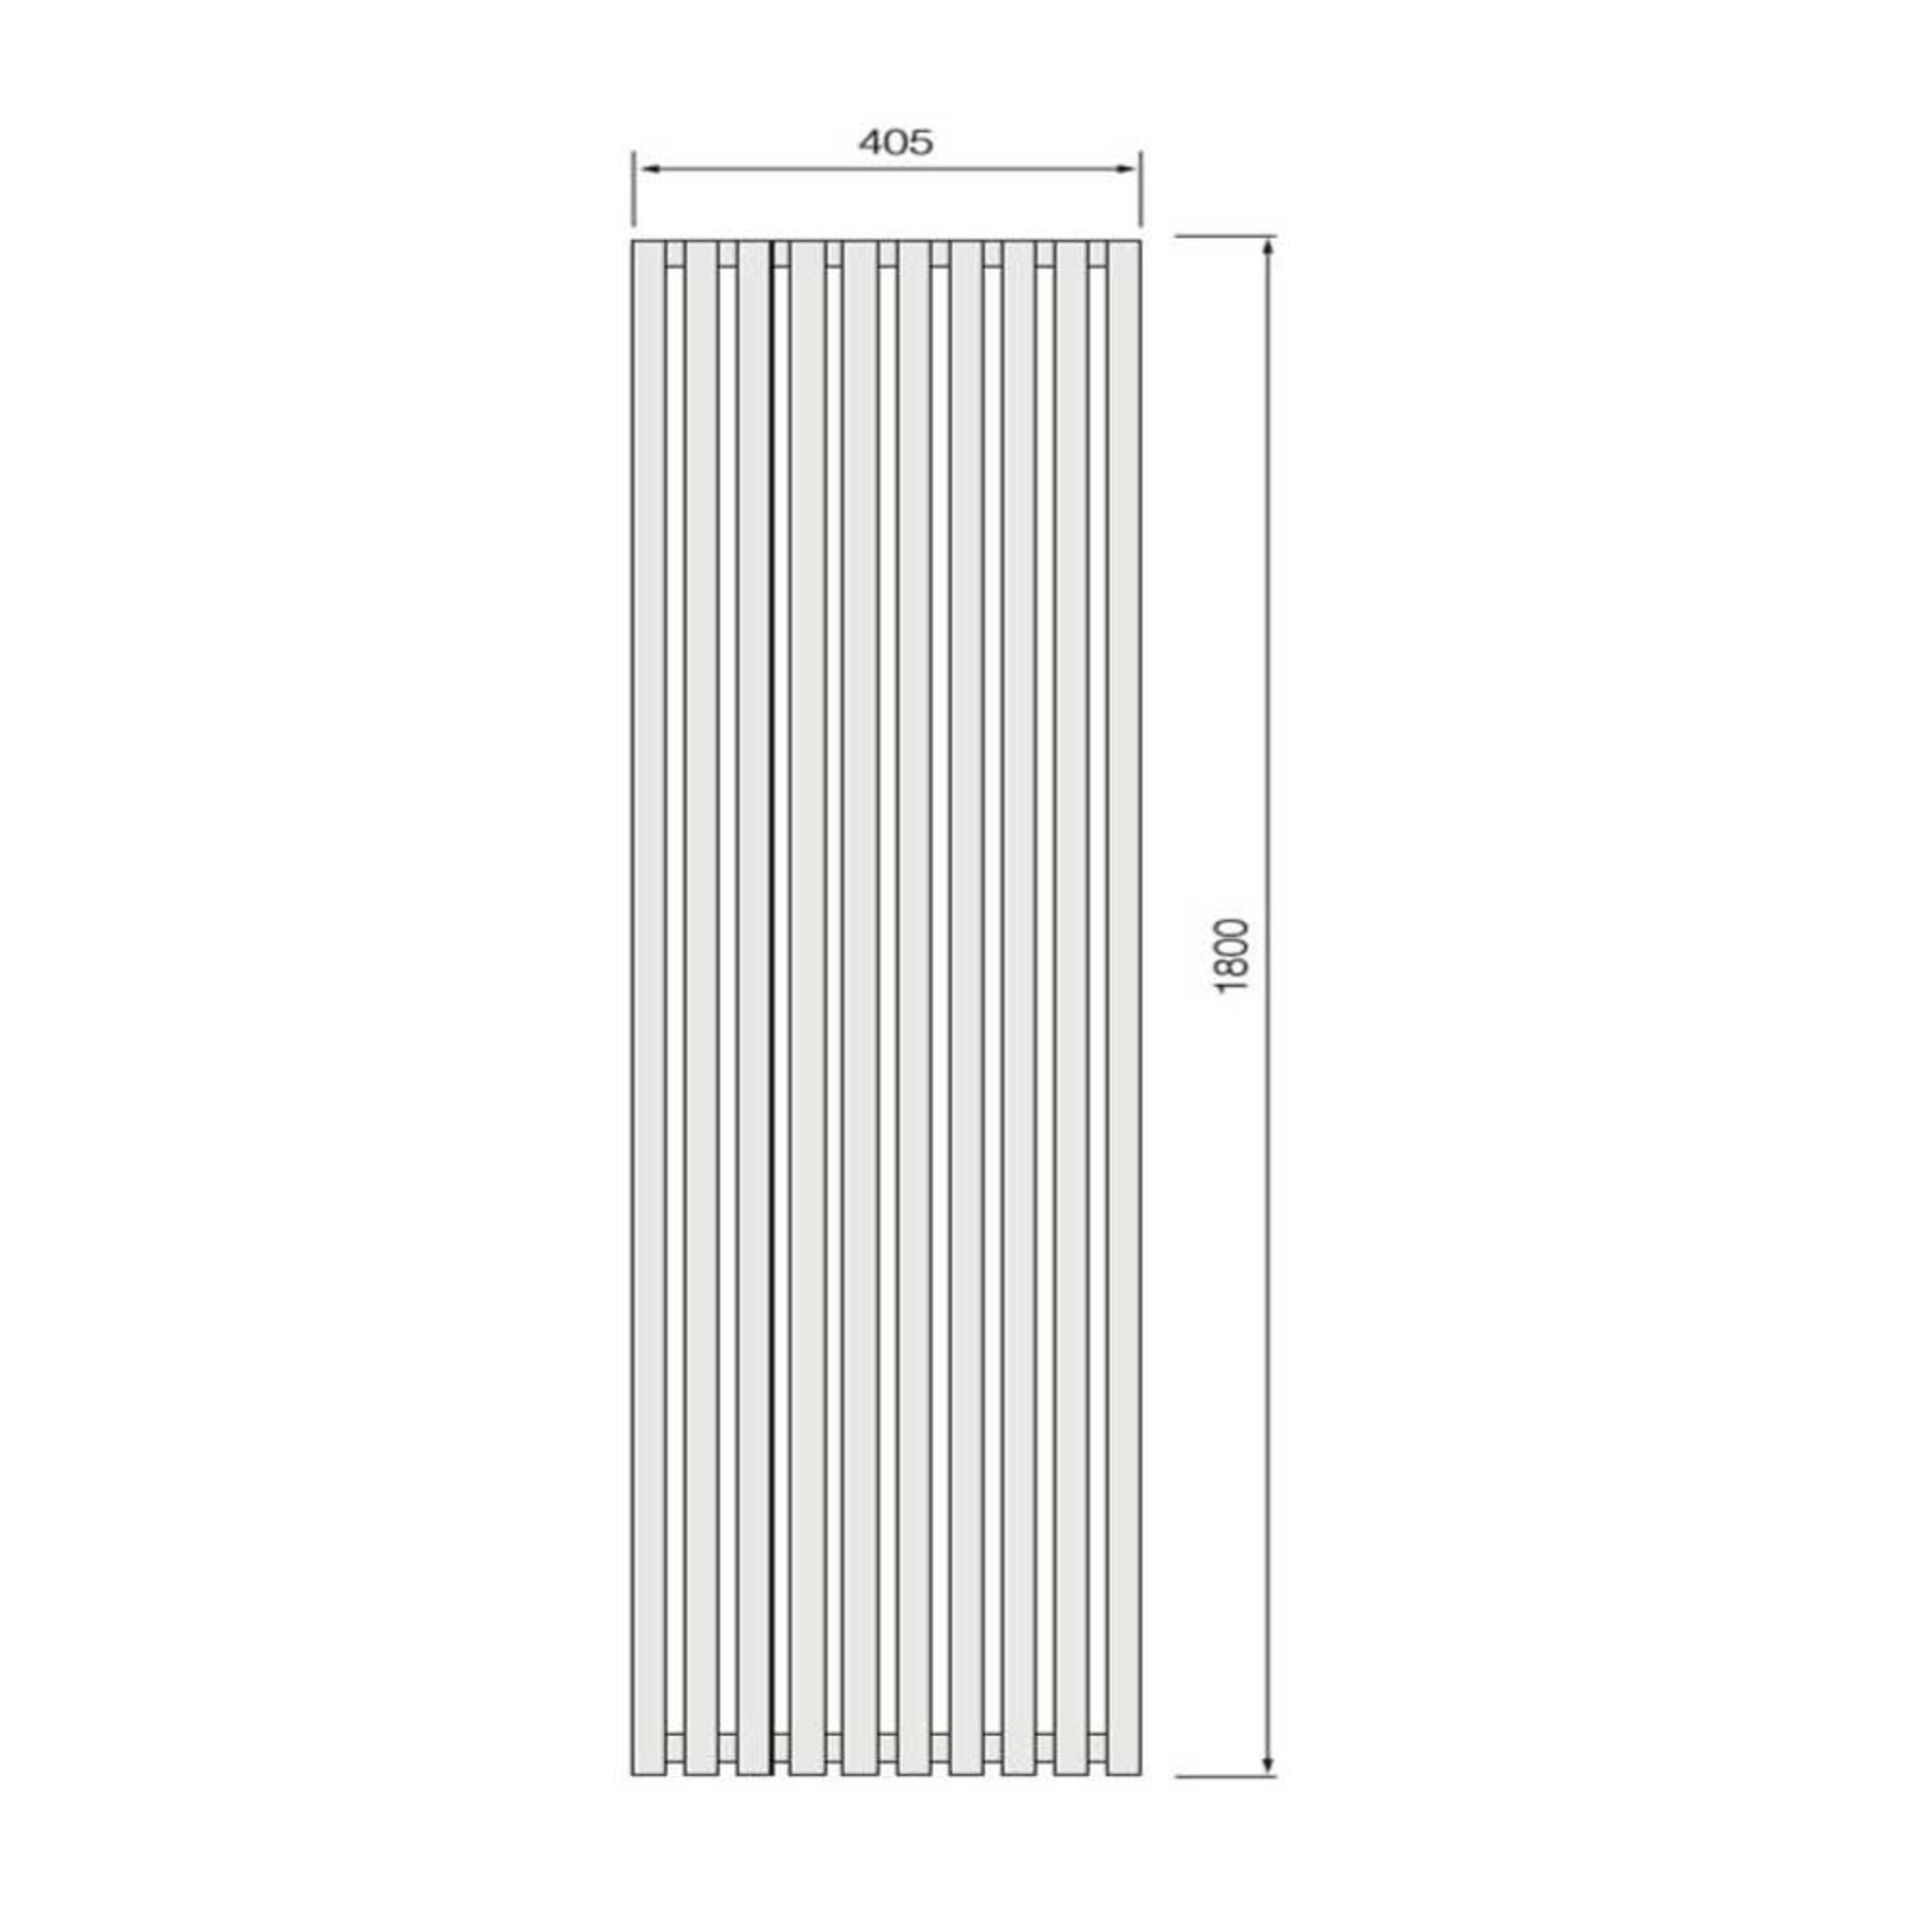 1 x Warmbase Kintonic 405x1800mm Contemporary White Vertical Radiator - New Boxed Stock - RRP £410 - Image 3 of 3